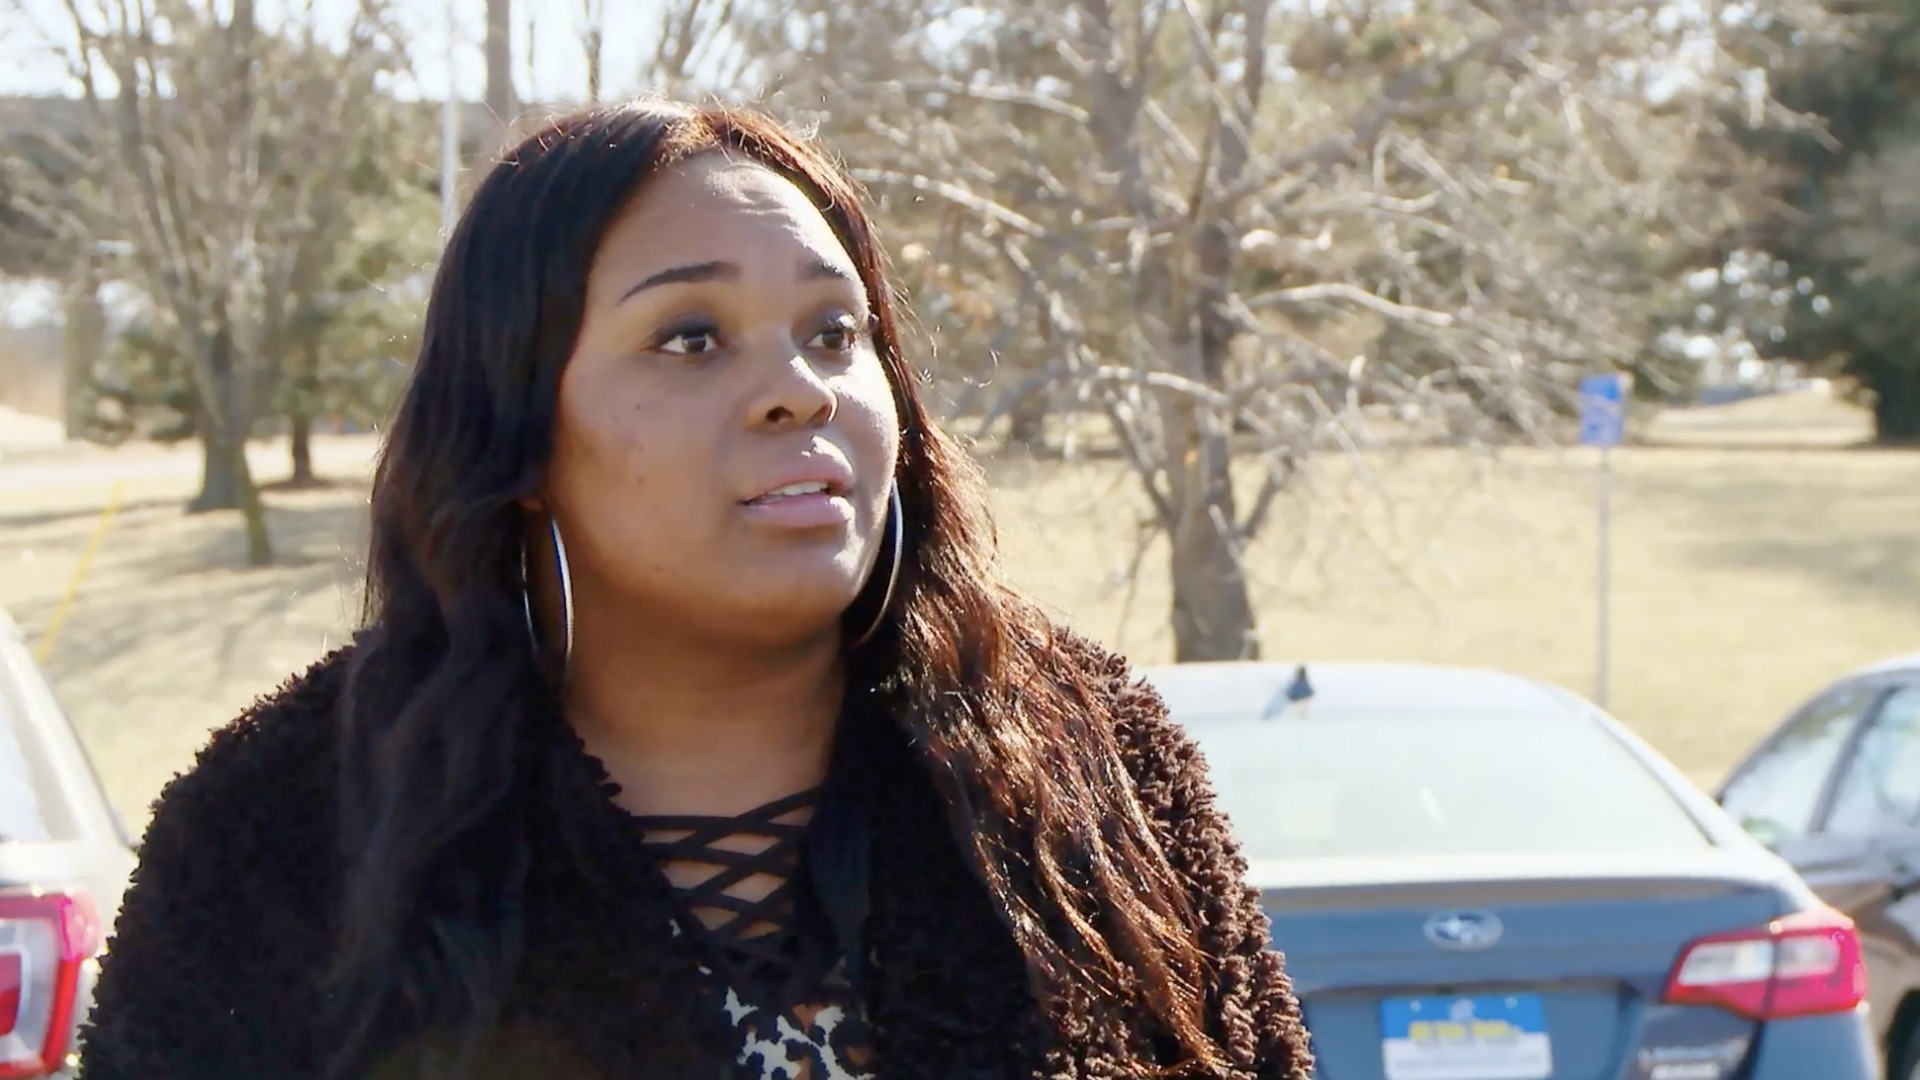 Watch Overheard: 'I'm Walking Out Here on Faith' | Love After Lockup Video Extras